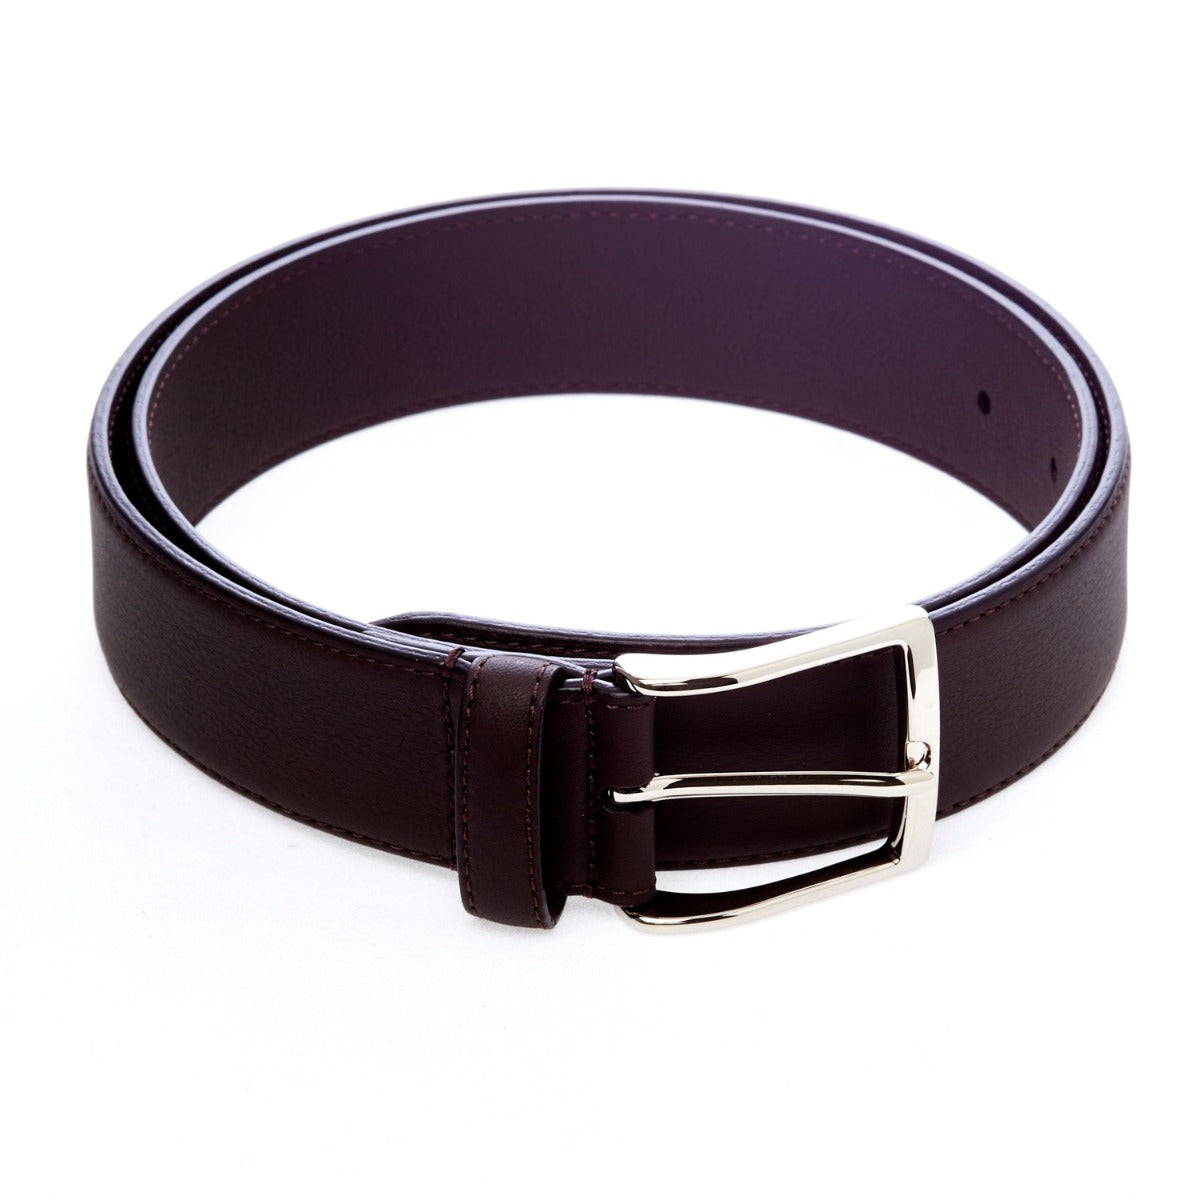 A Sovereign Grade Dark Brown Casual Belt from KirbyAllison.com on a white background.